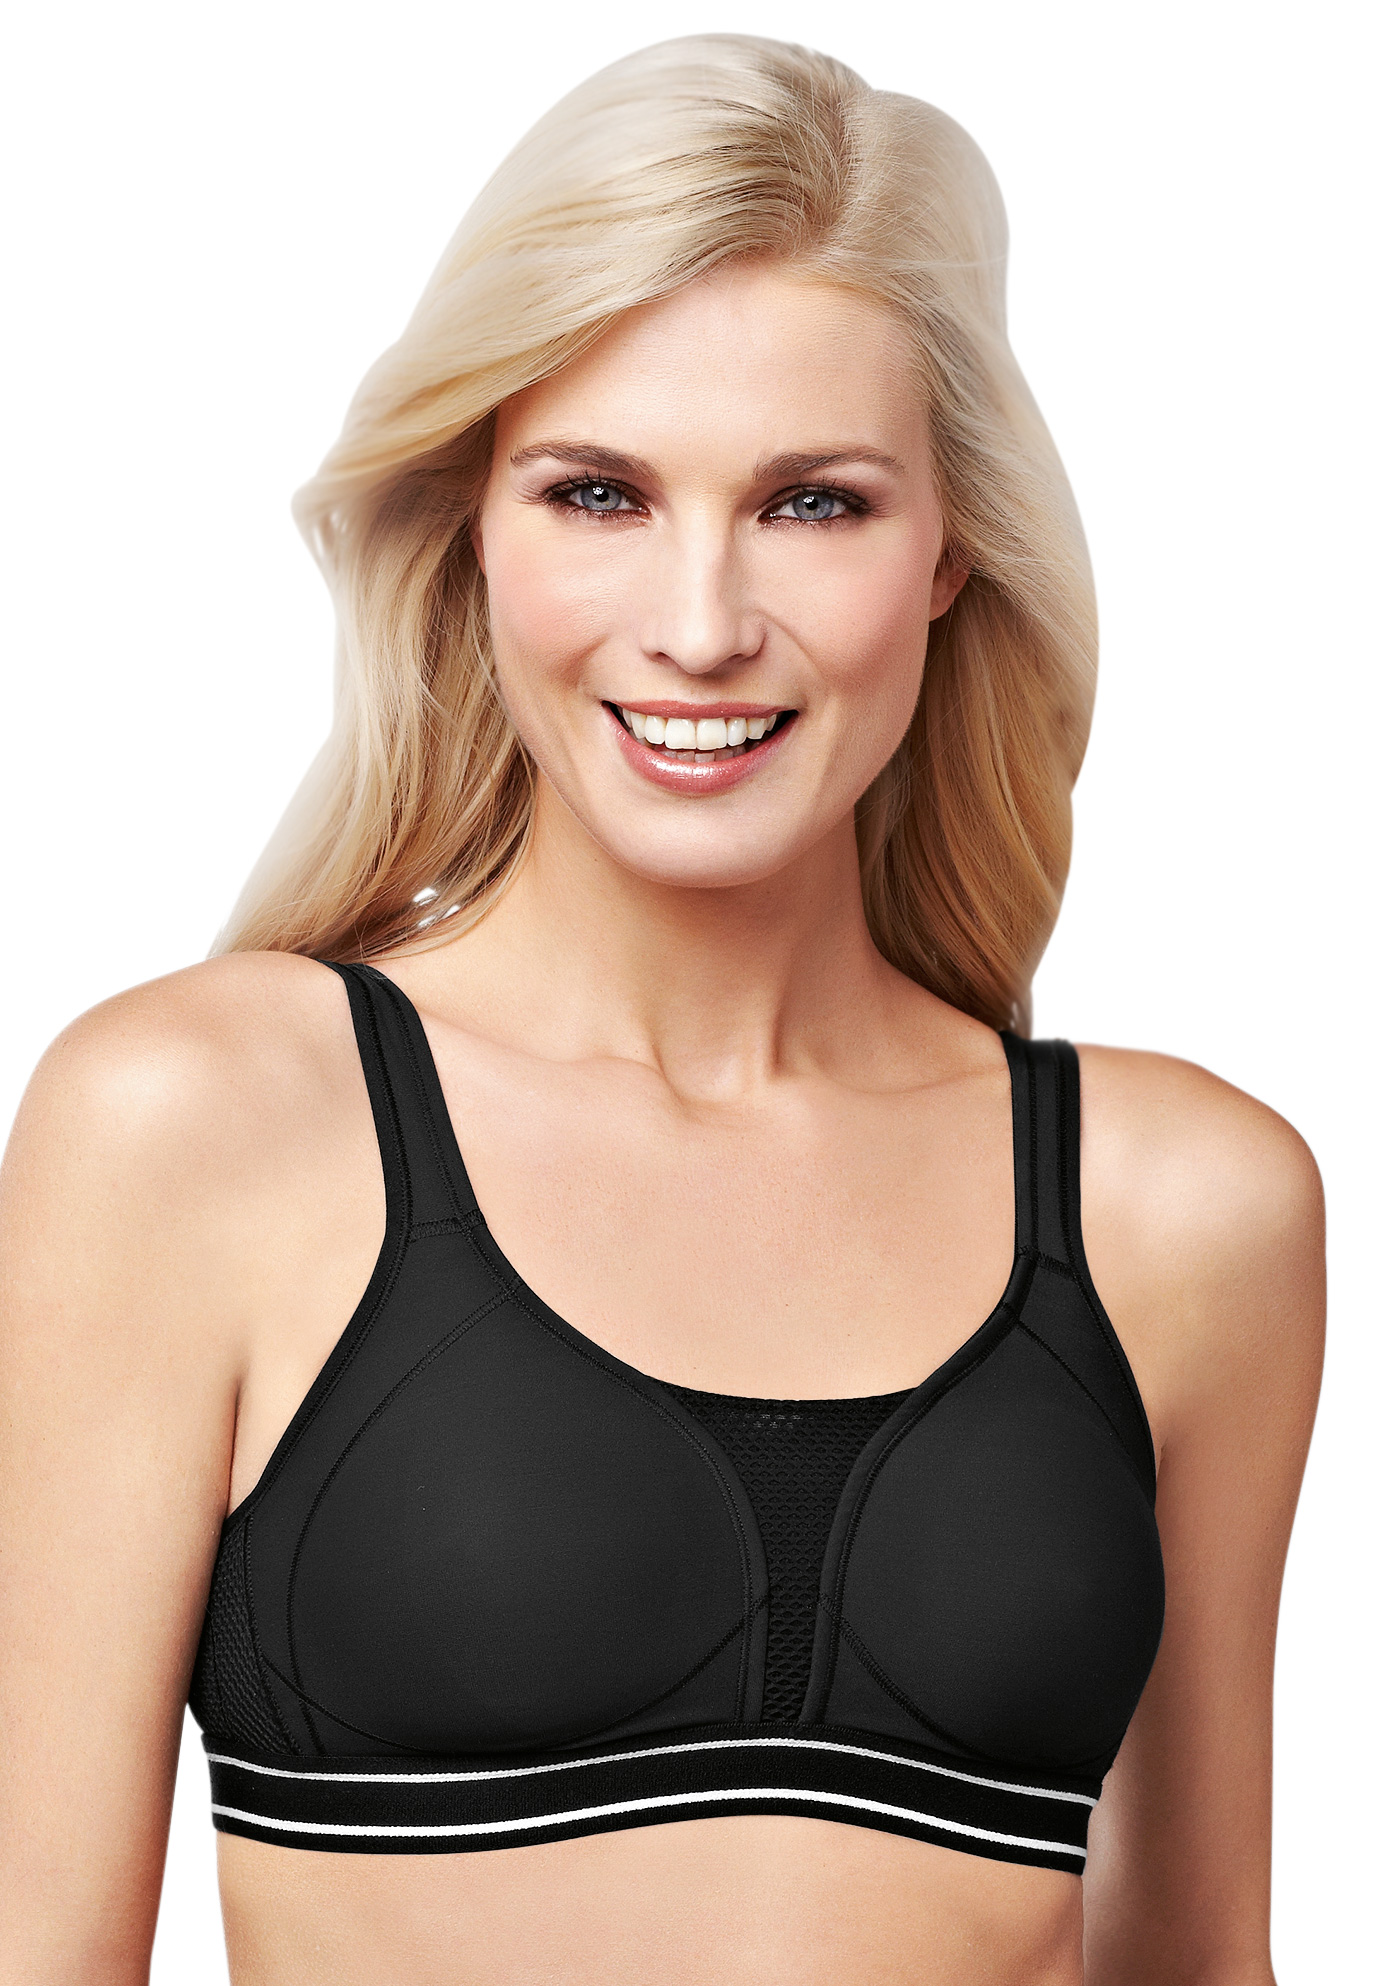 Swimsuitsforall.com coupon: Plus Size Women's Amoena Performance Sports Bra by Amoena in Black (Size 34 C)